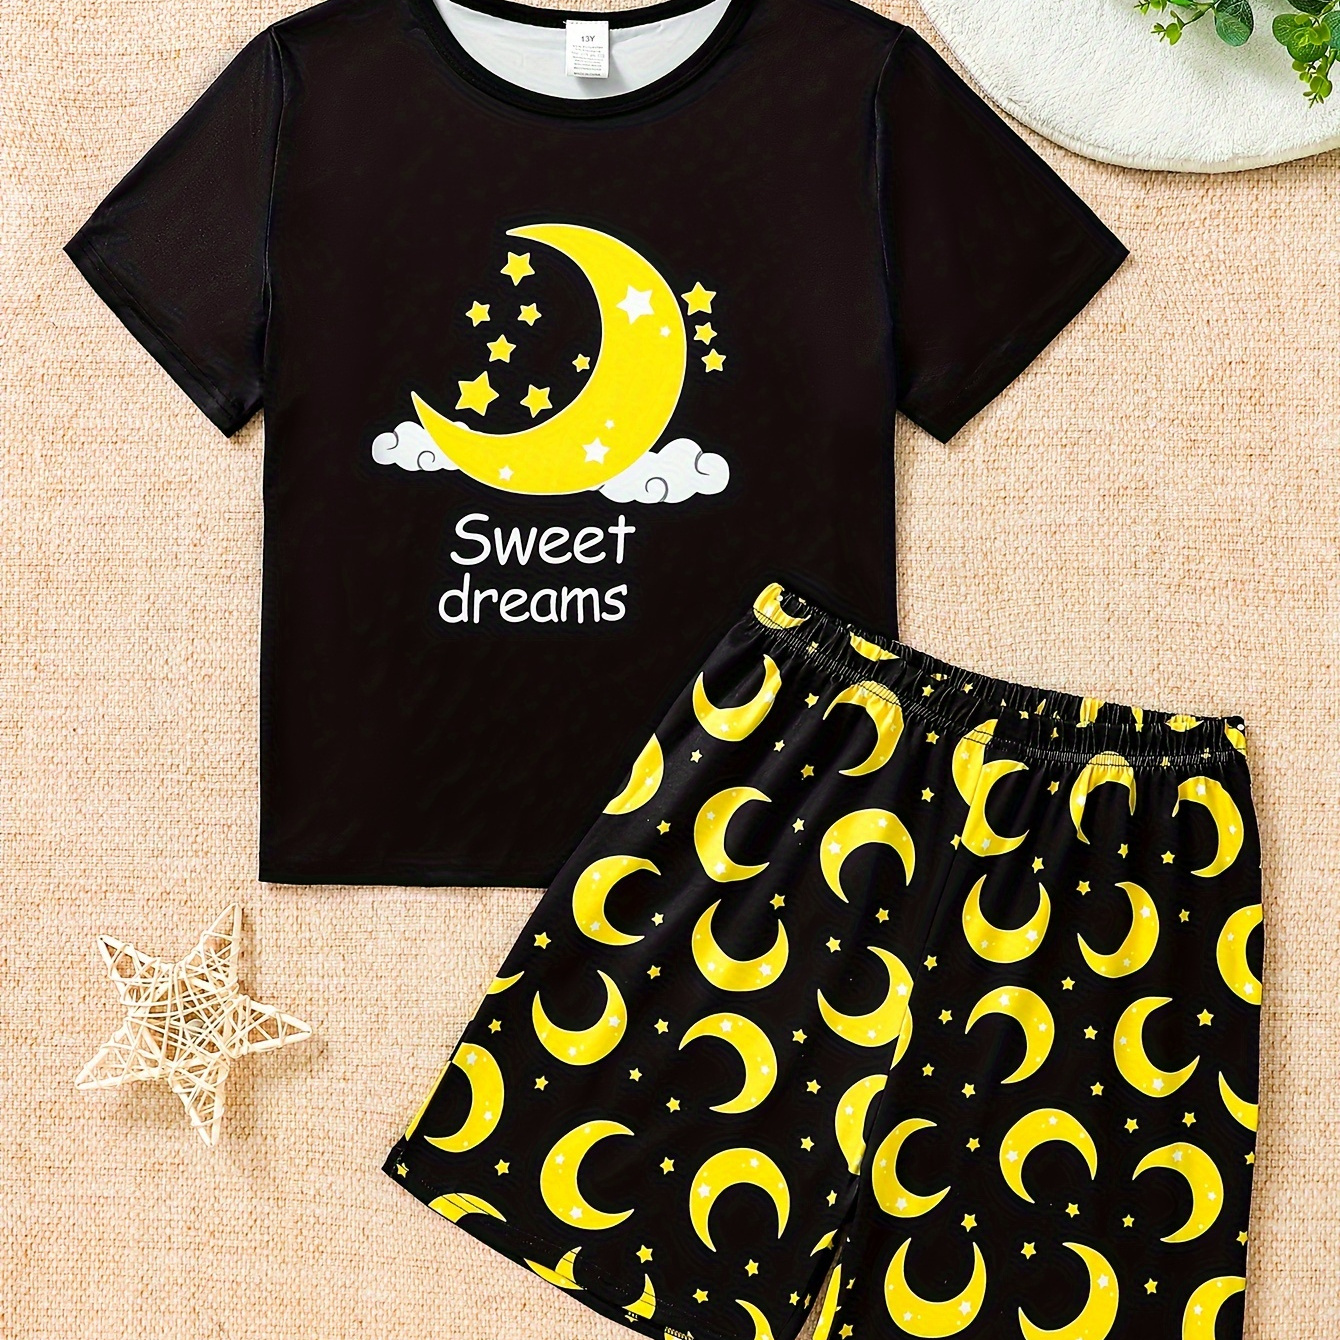 

2-piece Teen Boys Summer Pajama Set, Casual Style Letter Moon & Stars Graphic Short Sleeve T-shirt & Matching Shorts, Loungewear Outfit